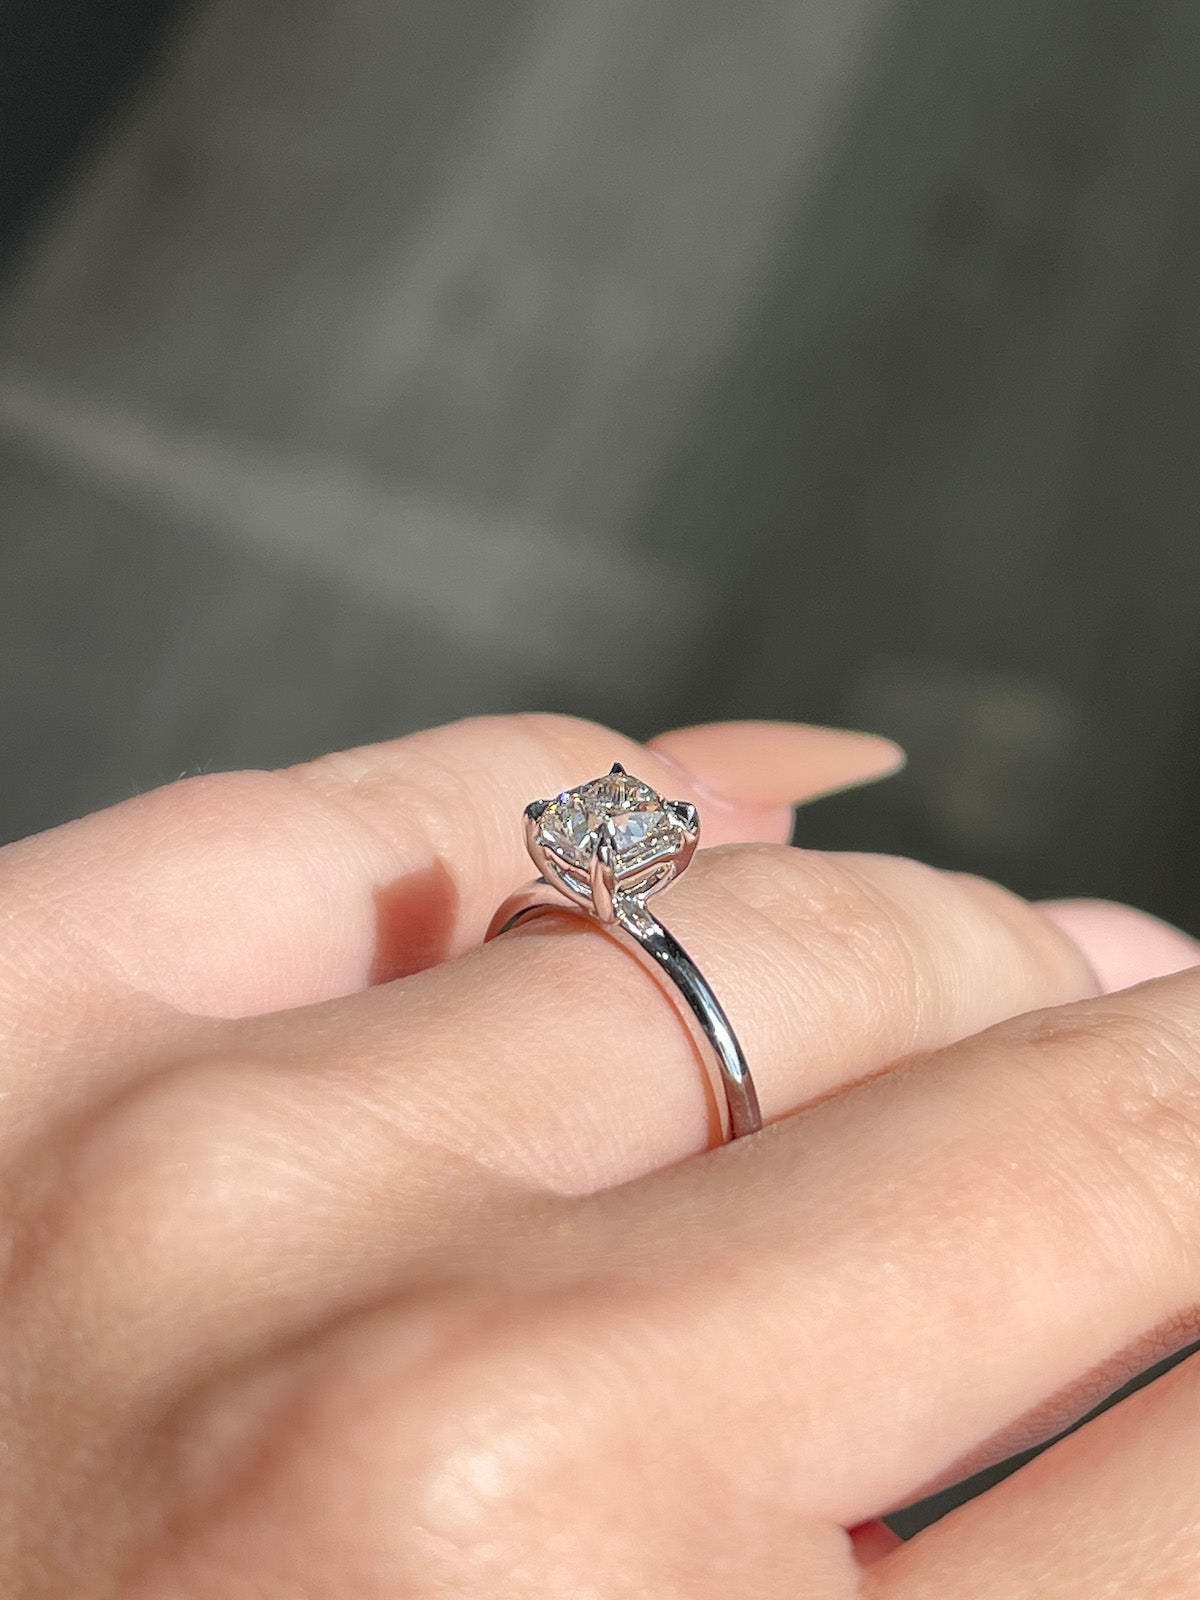 1.01 Cushion Cut Diamond | D color SI1 clarity | Engagement Ring Wednesday - Happy Jewelers Fine Jewelry Lifetime Warranty